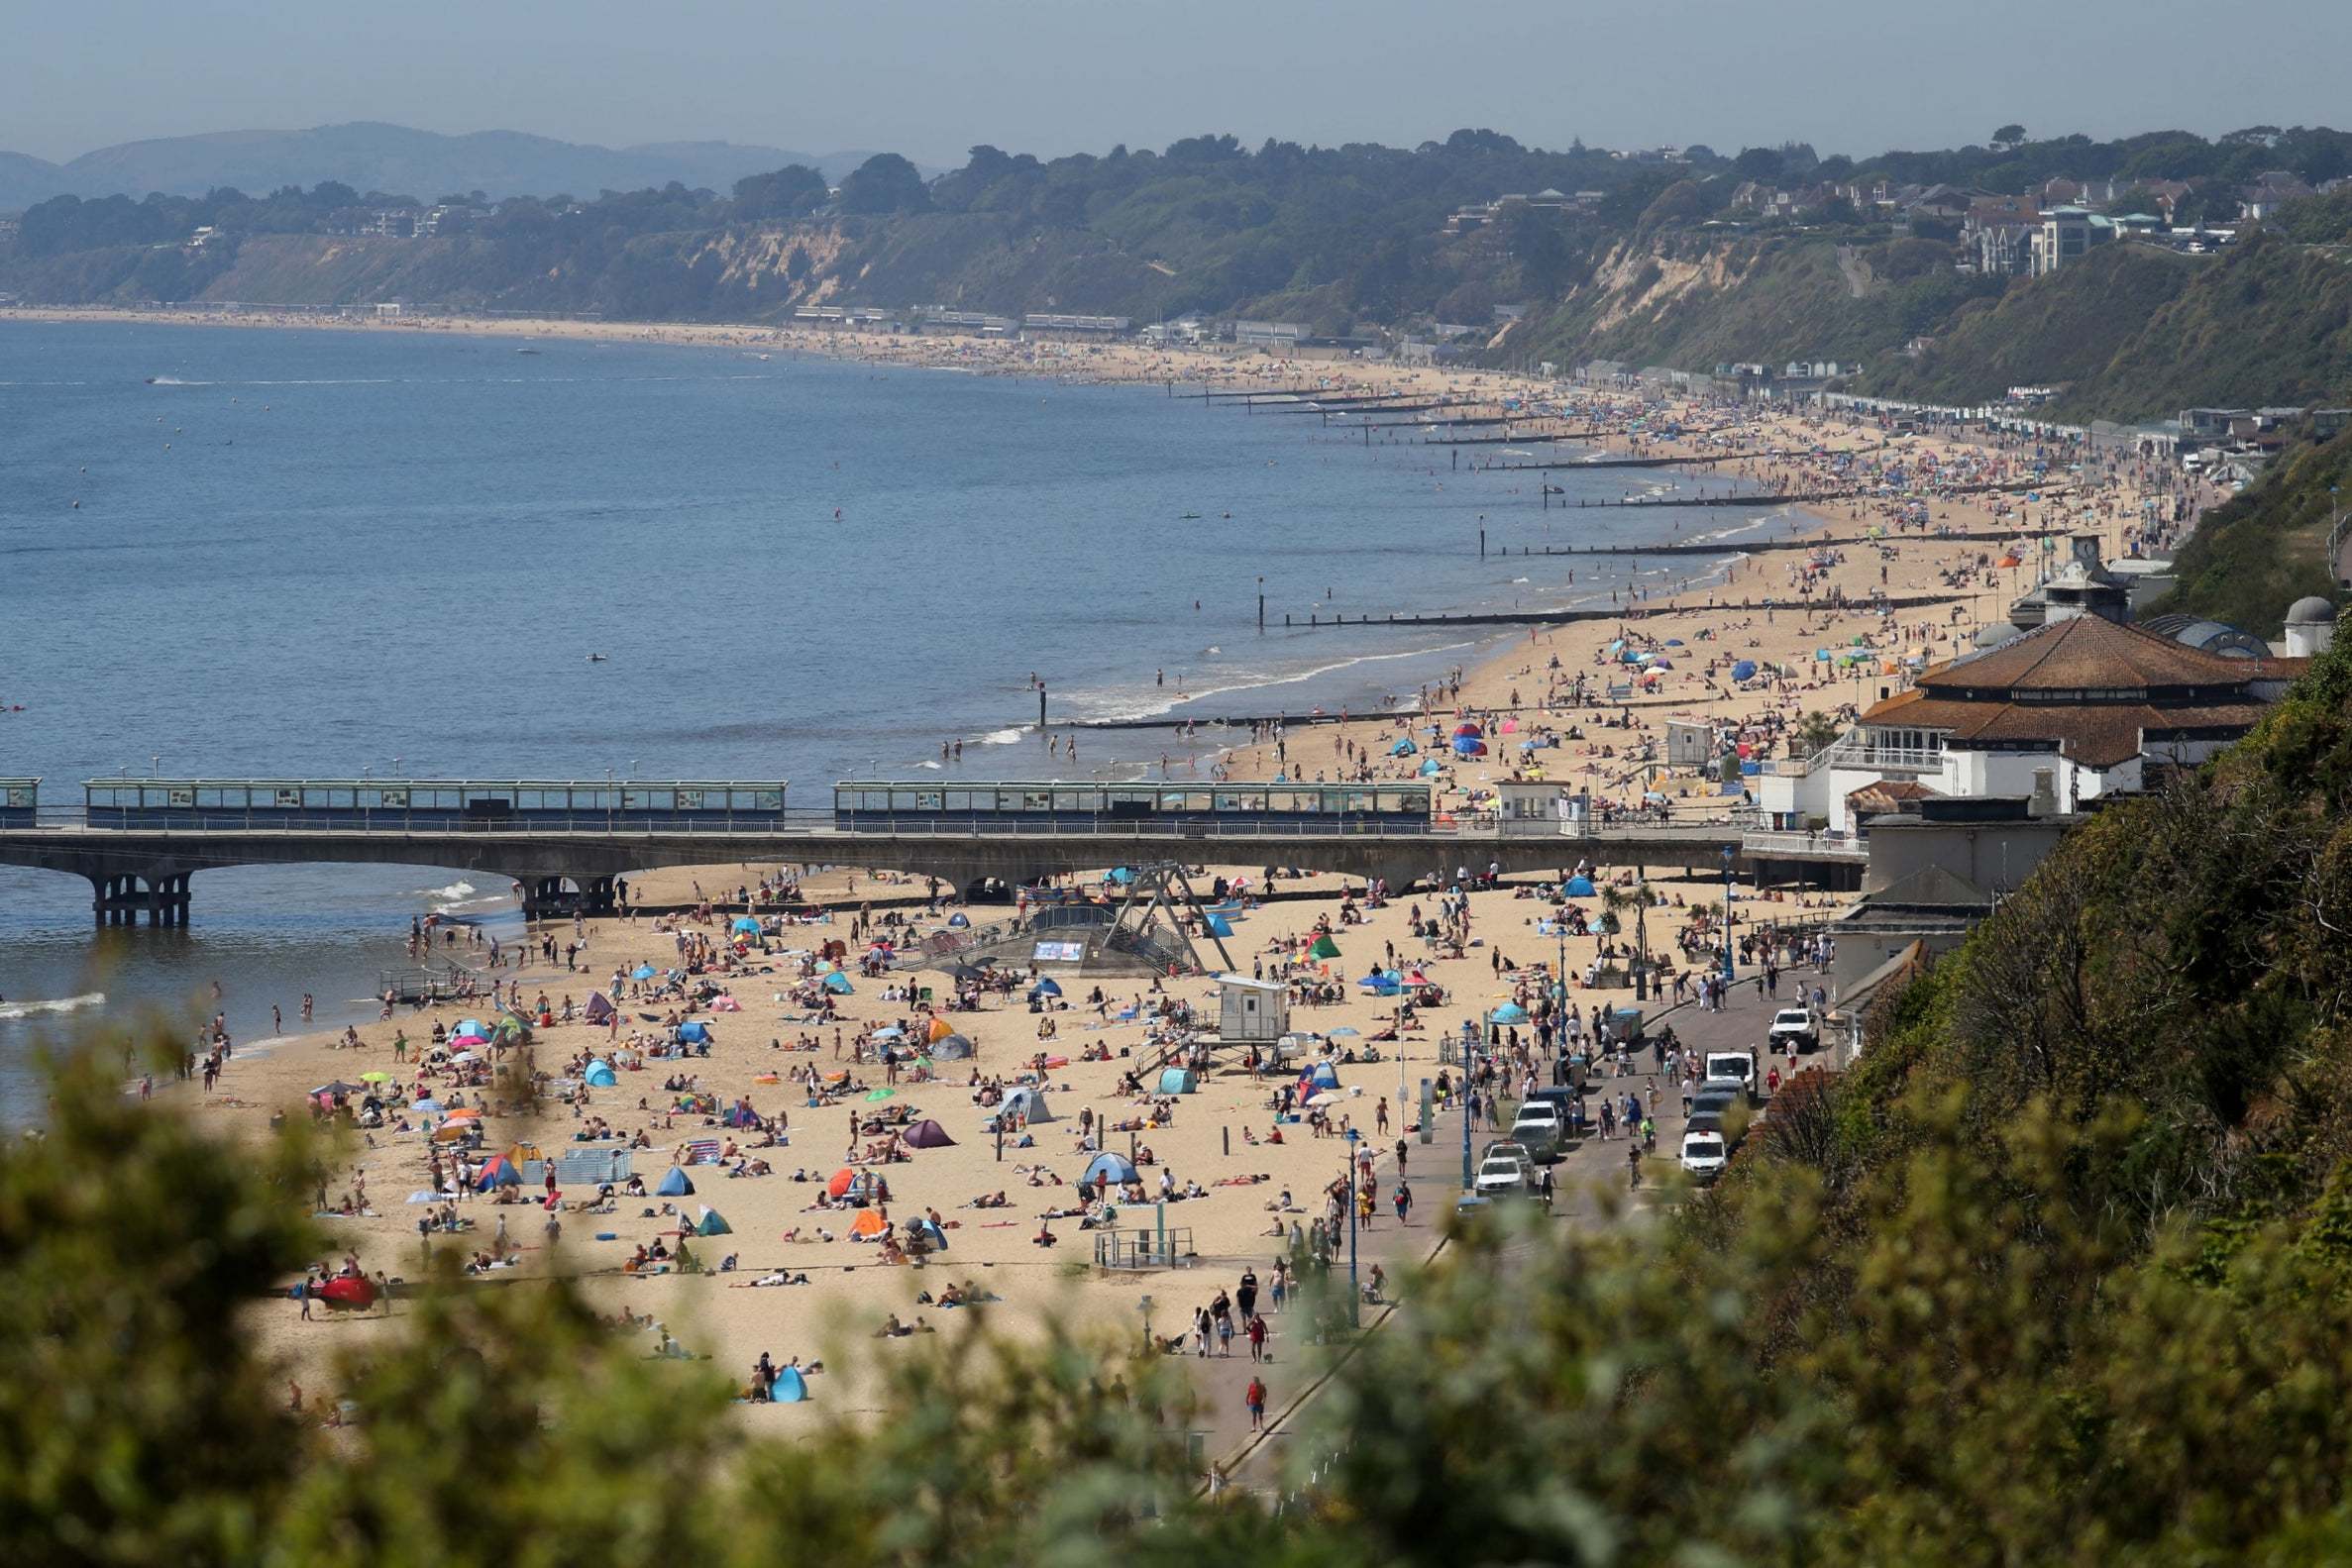 Thousands of people flocked to Bournemouth beach in Dorset to enjoy the sunshine